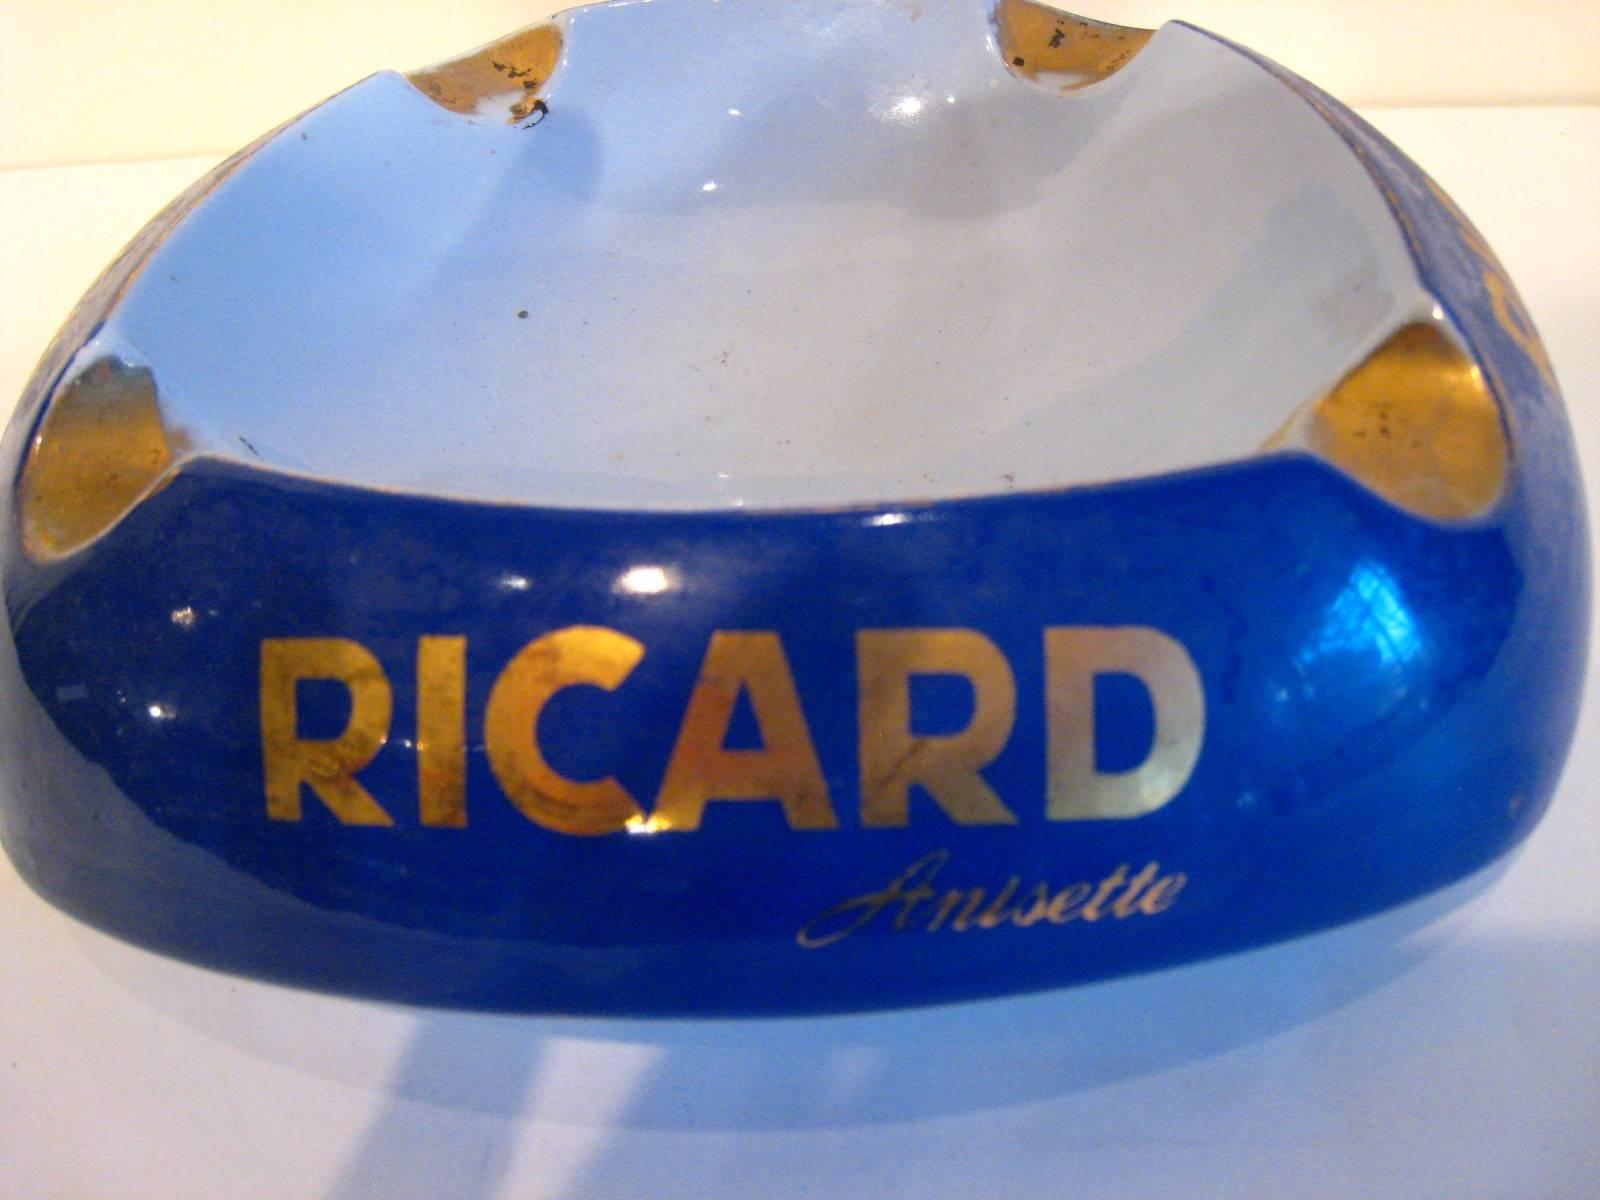 A Classic vintage Ricard Anisette ceramic ashtray with great color and graphics.